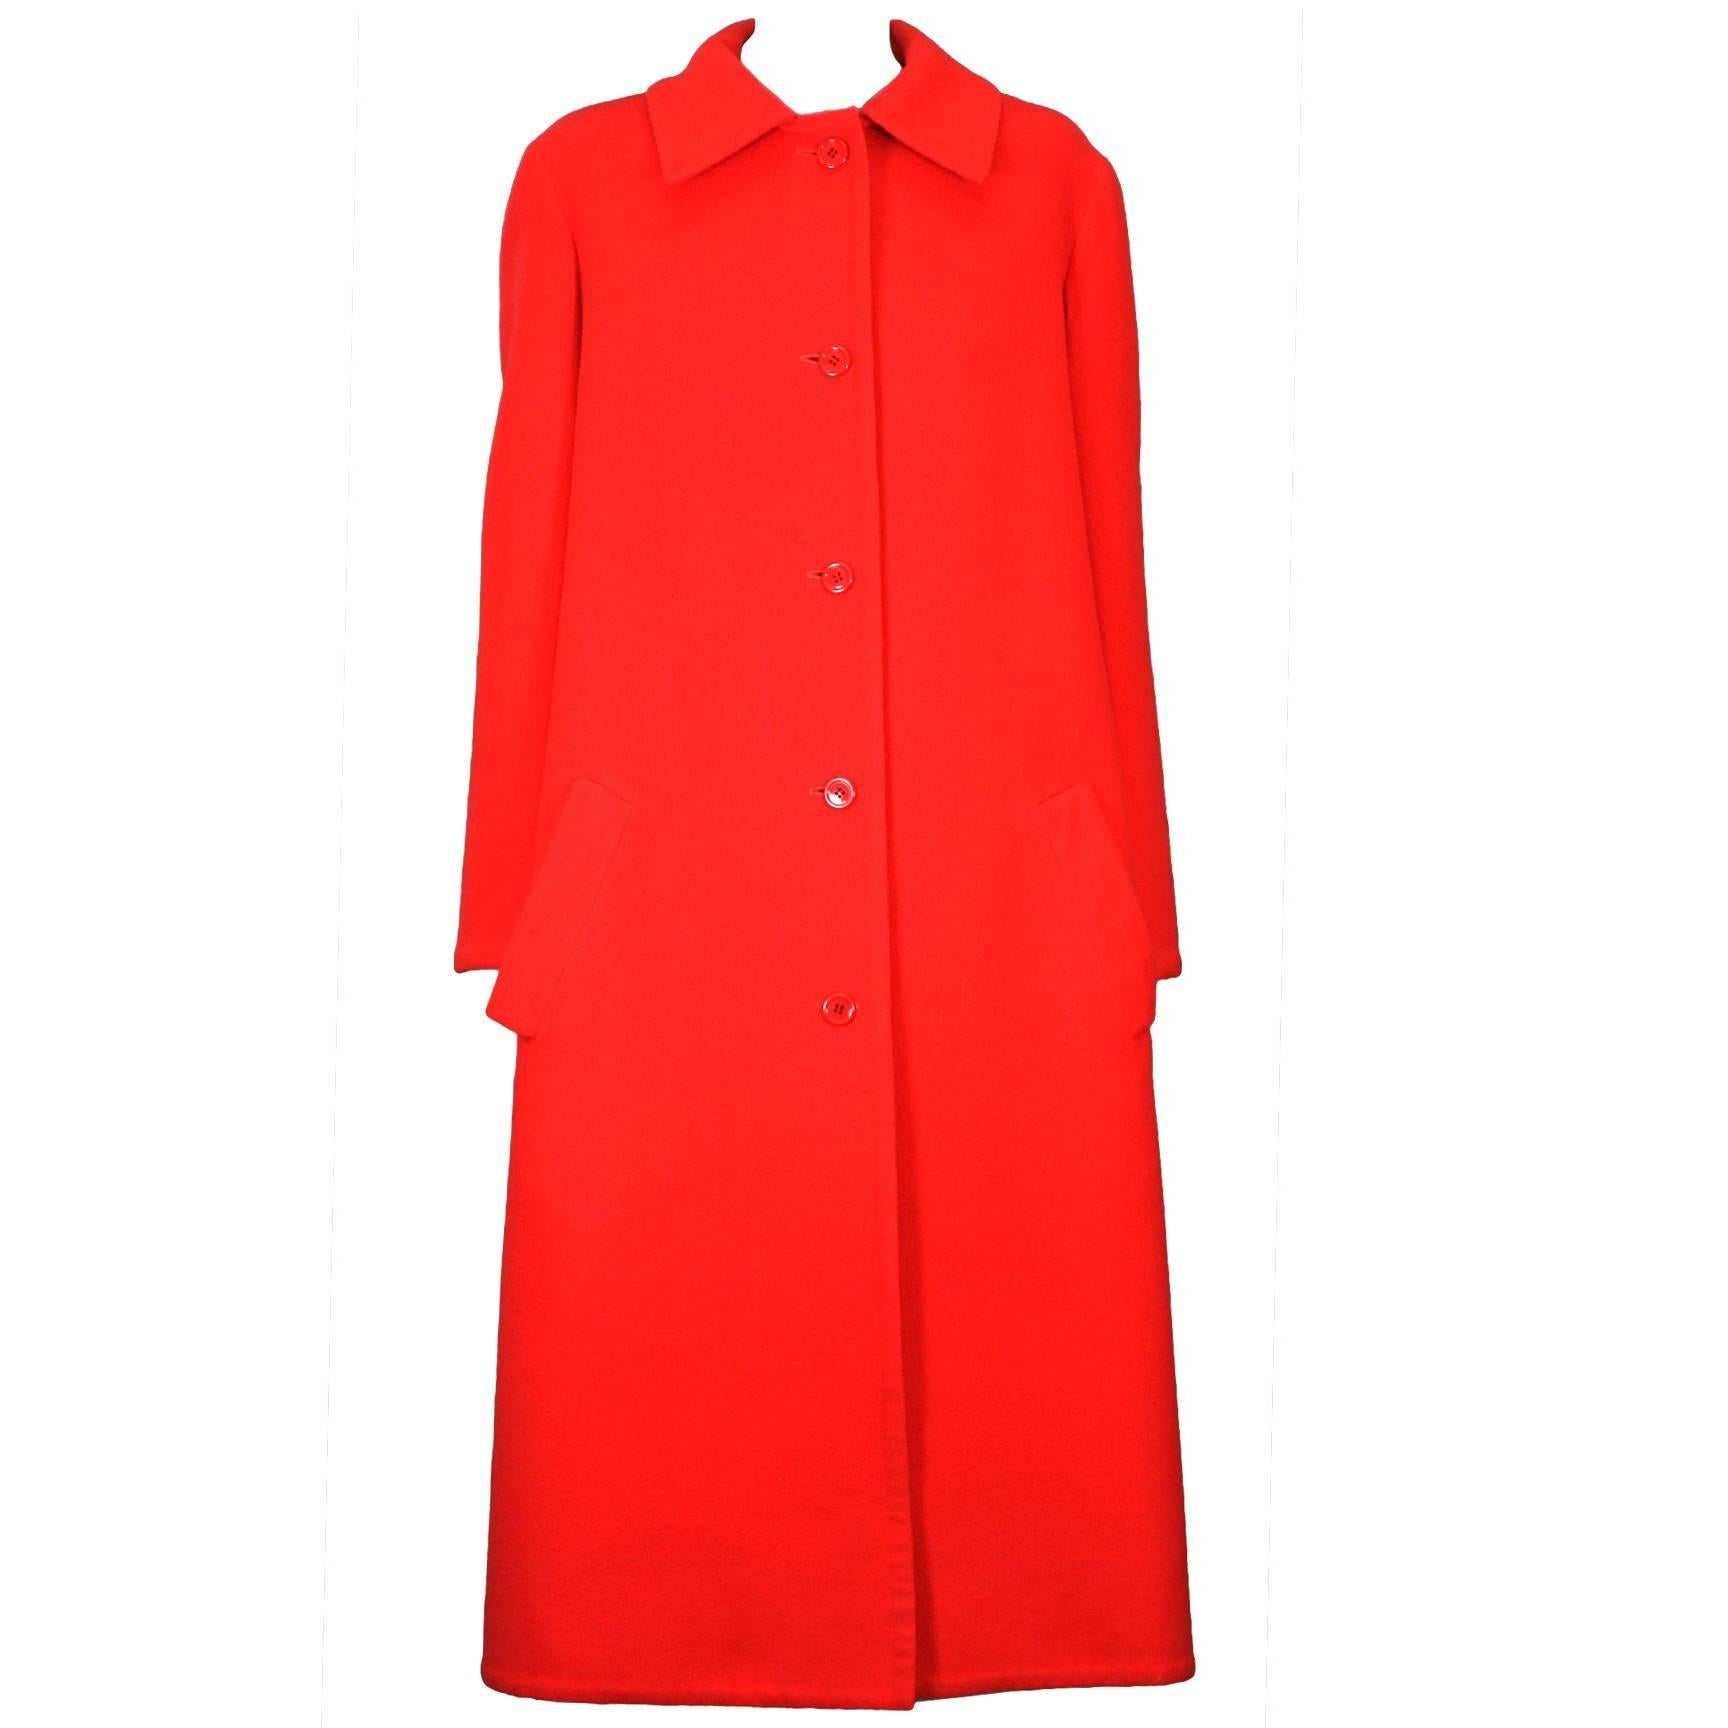 Halston's Double Faced Tomato Red Wool Coat